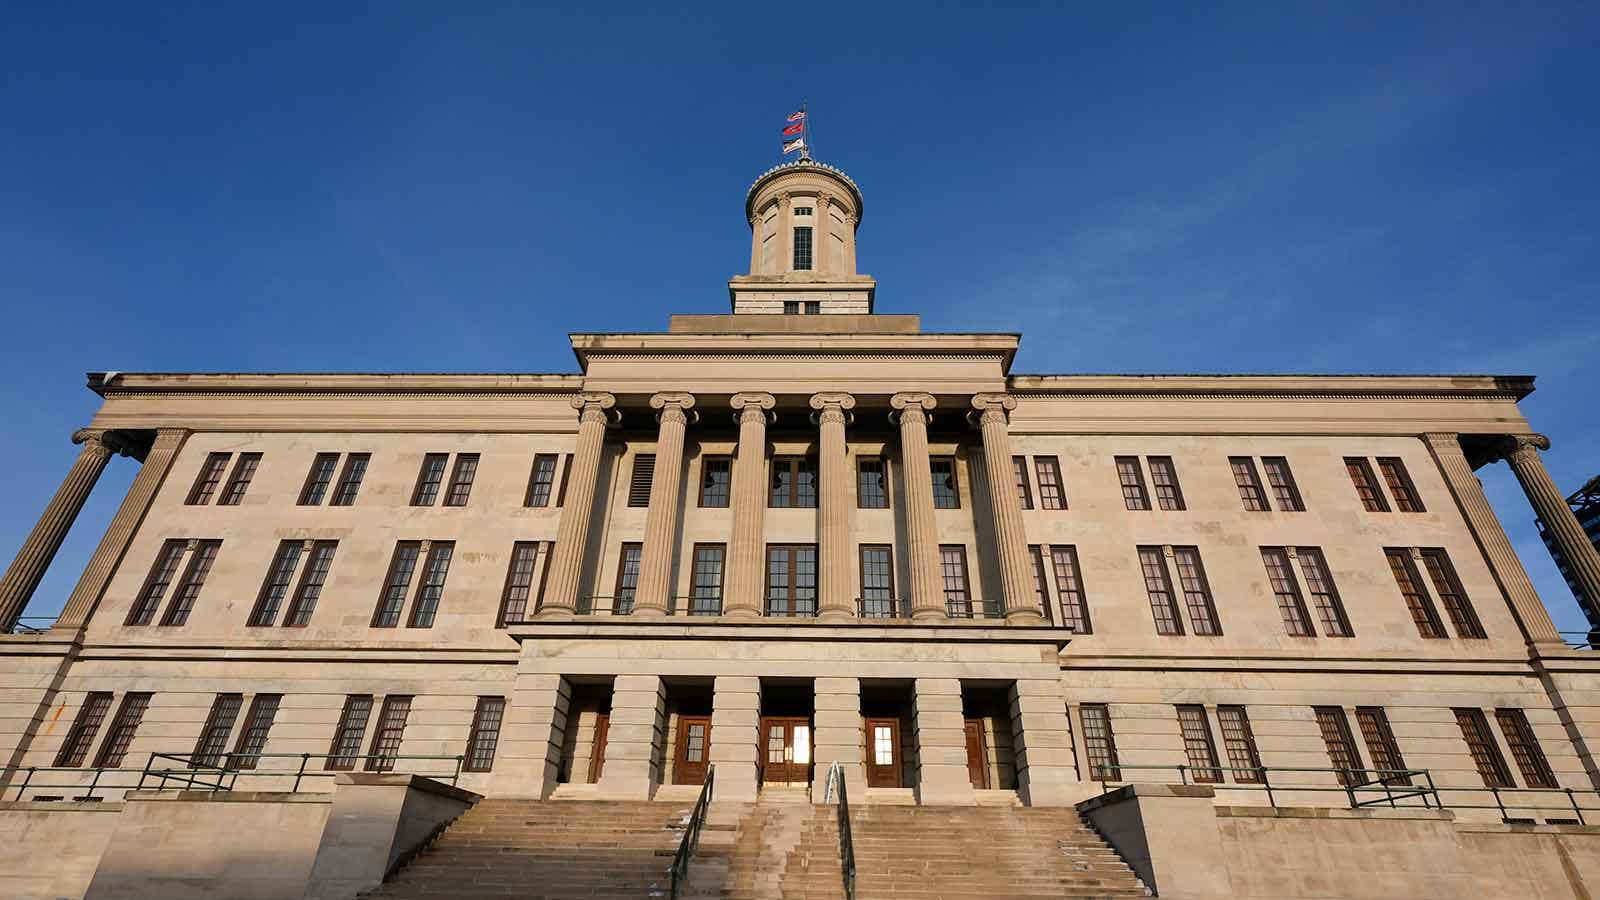 Tenn. Lawmakers OK Bill Penalizing Adults Who Support Minors Gain Gender-Affirming Care